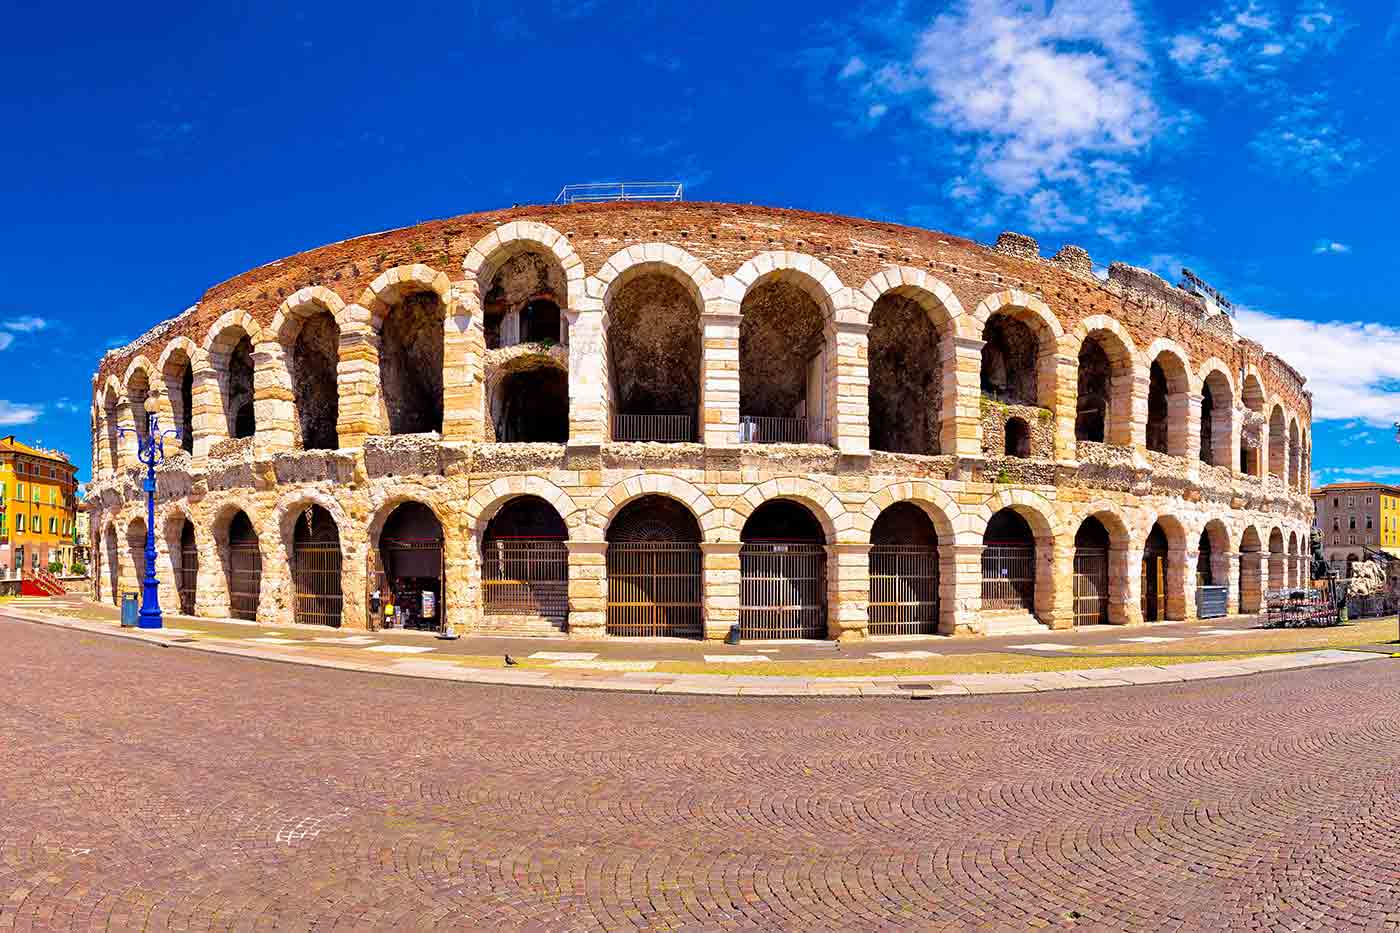 Tourist Attractions to See in Verona